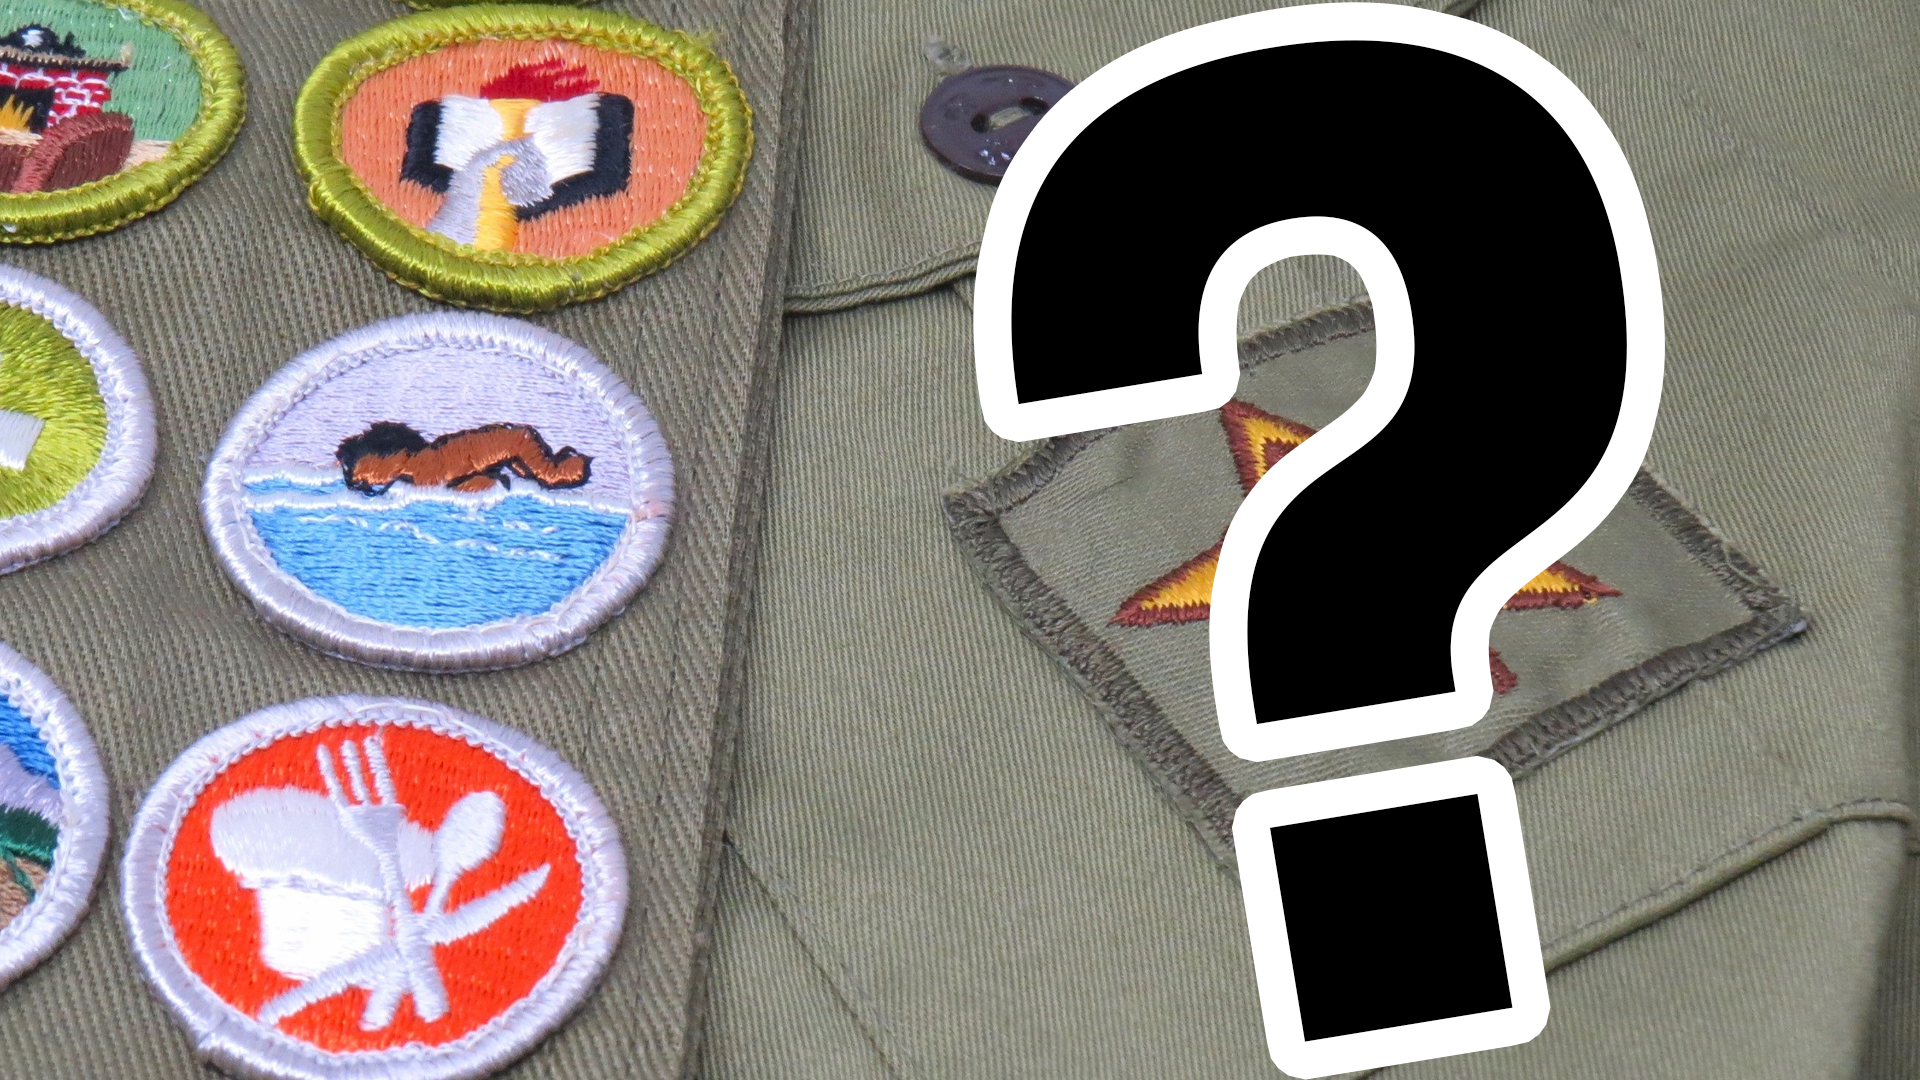 Badges and a question mark